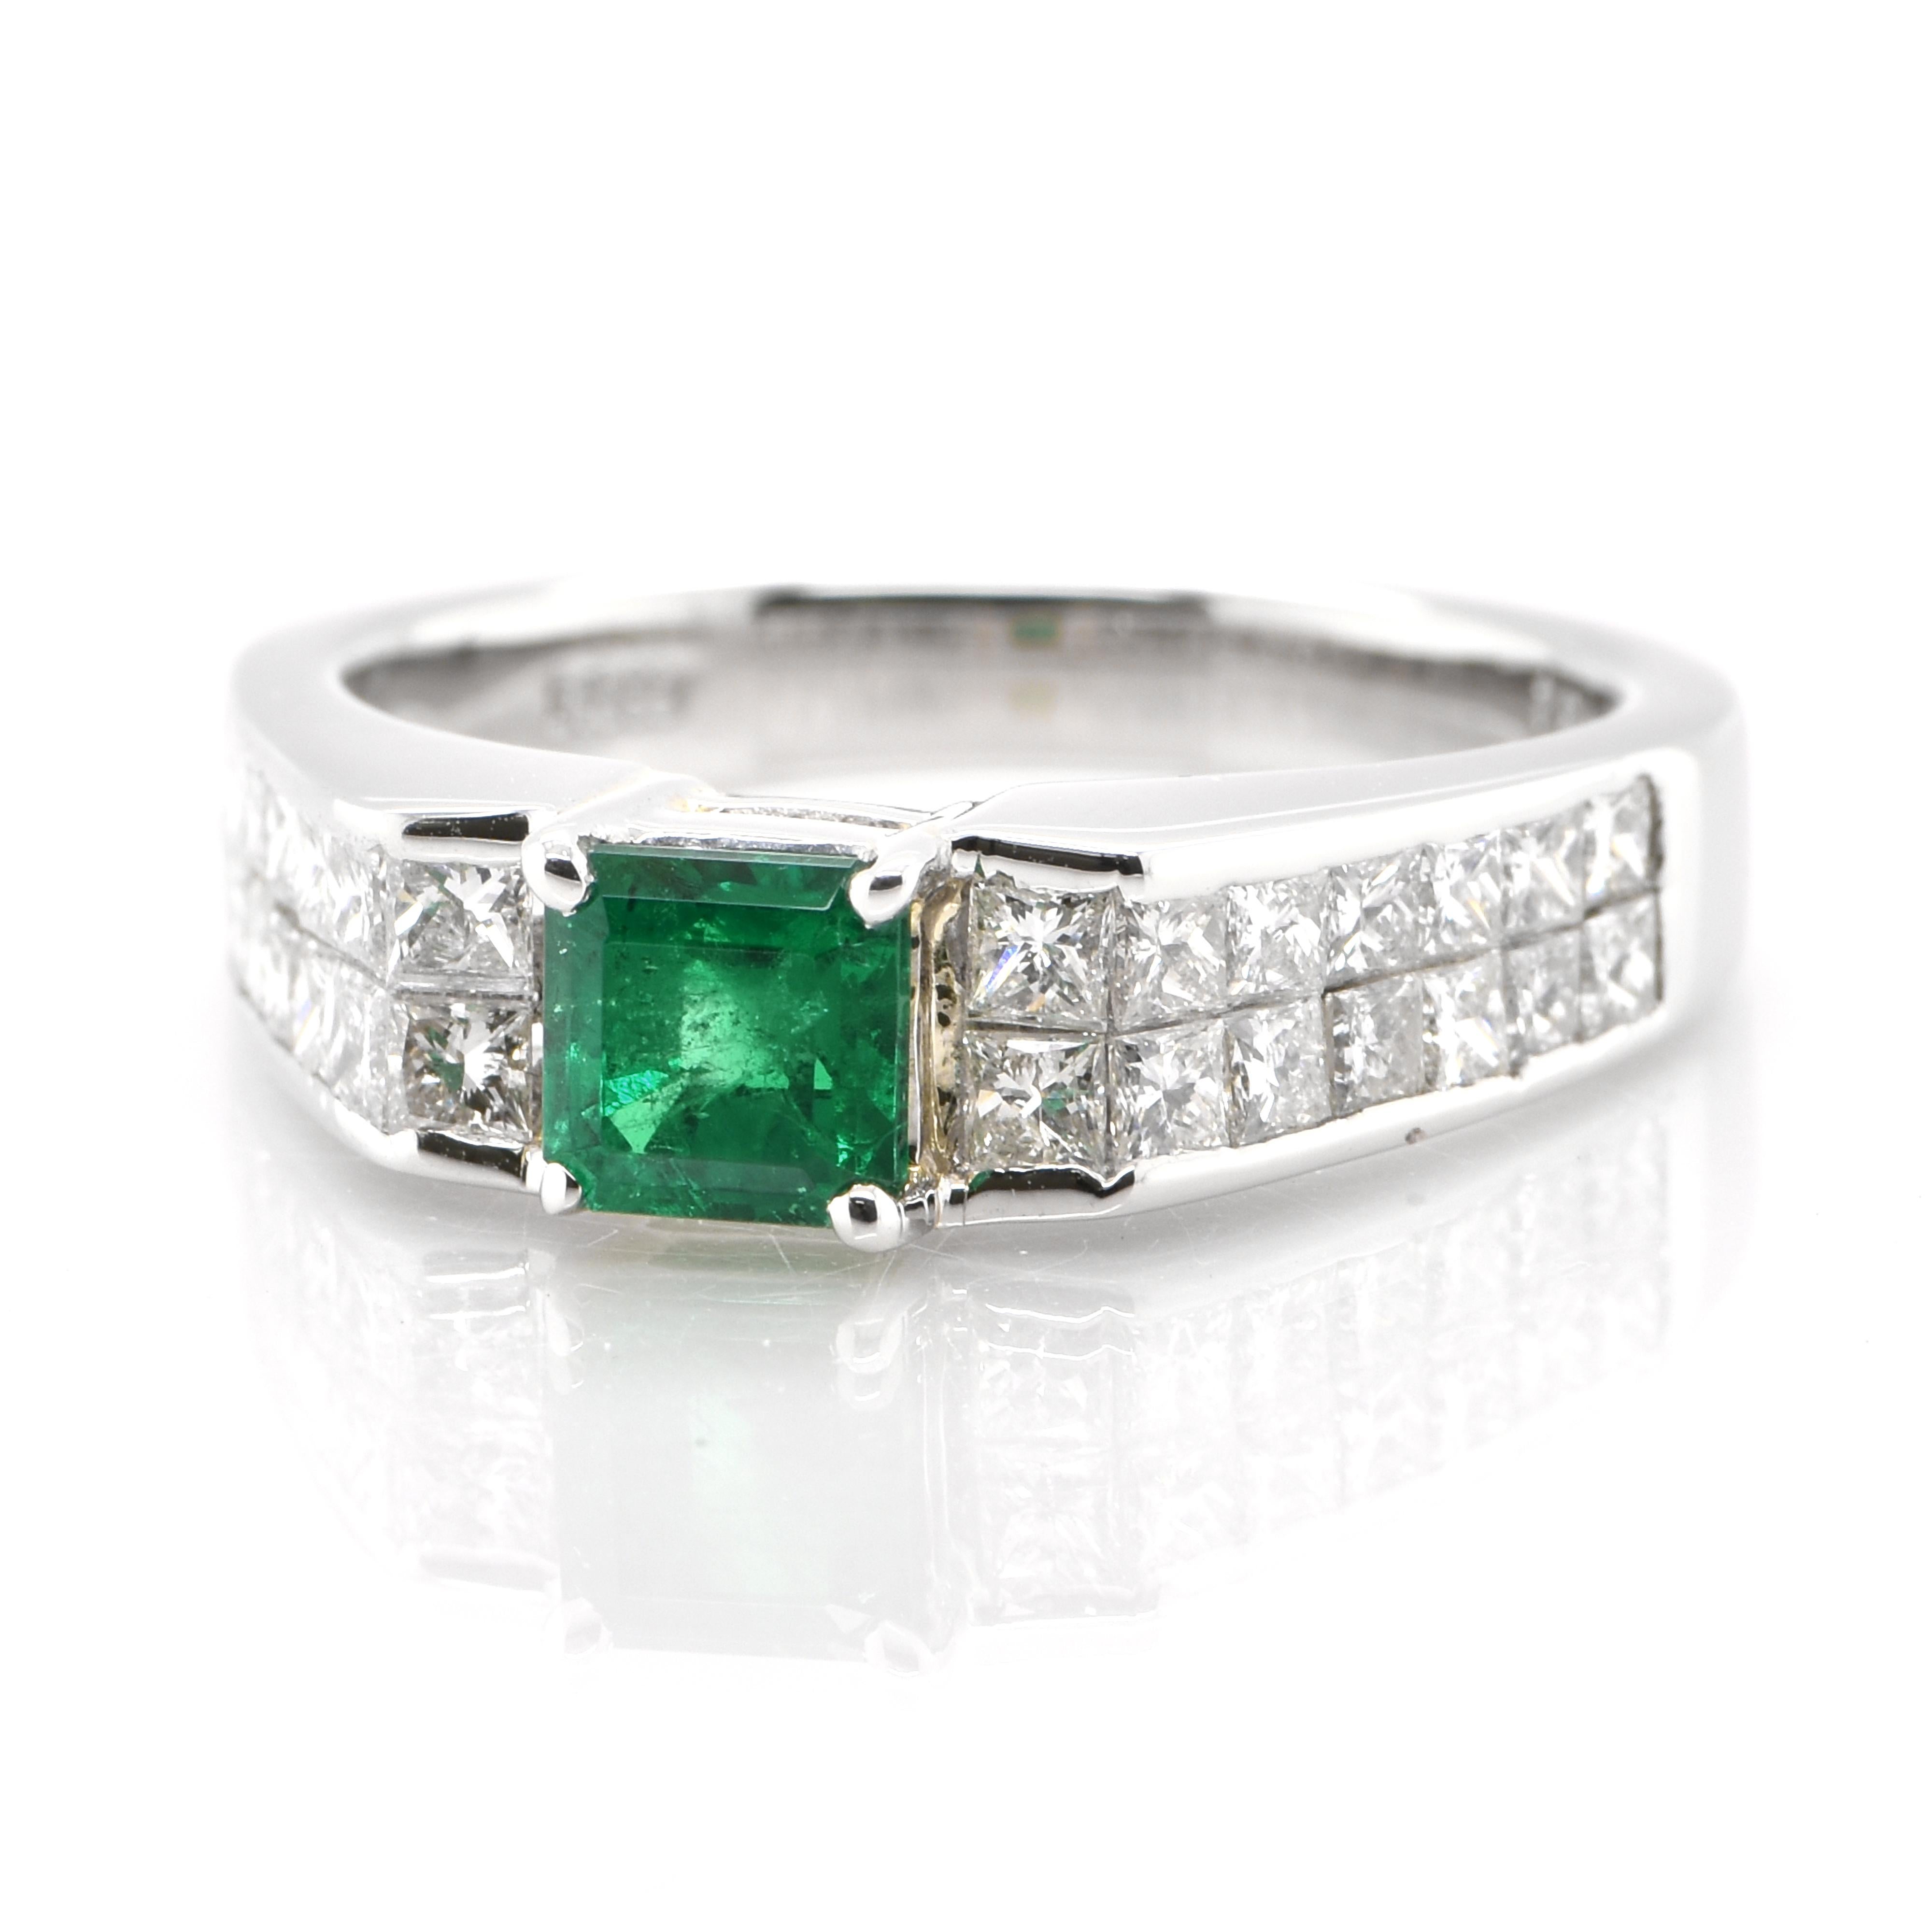 A stunning Engagement ring featuring a 0.64 Carat, Natural Emerald and 1.15 Carats of Diamond Accents set in Platinum. The Emerald displays exceptional color and clarity. People have admired emerald’s green for thousands of years. Emeralds have